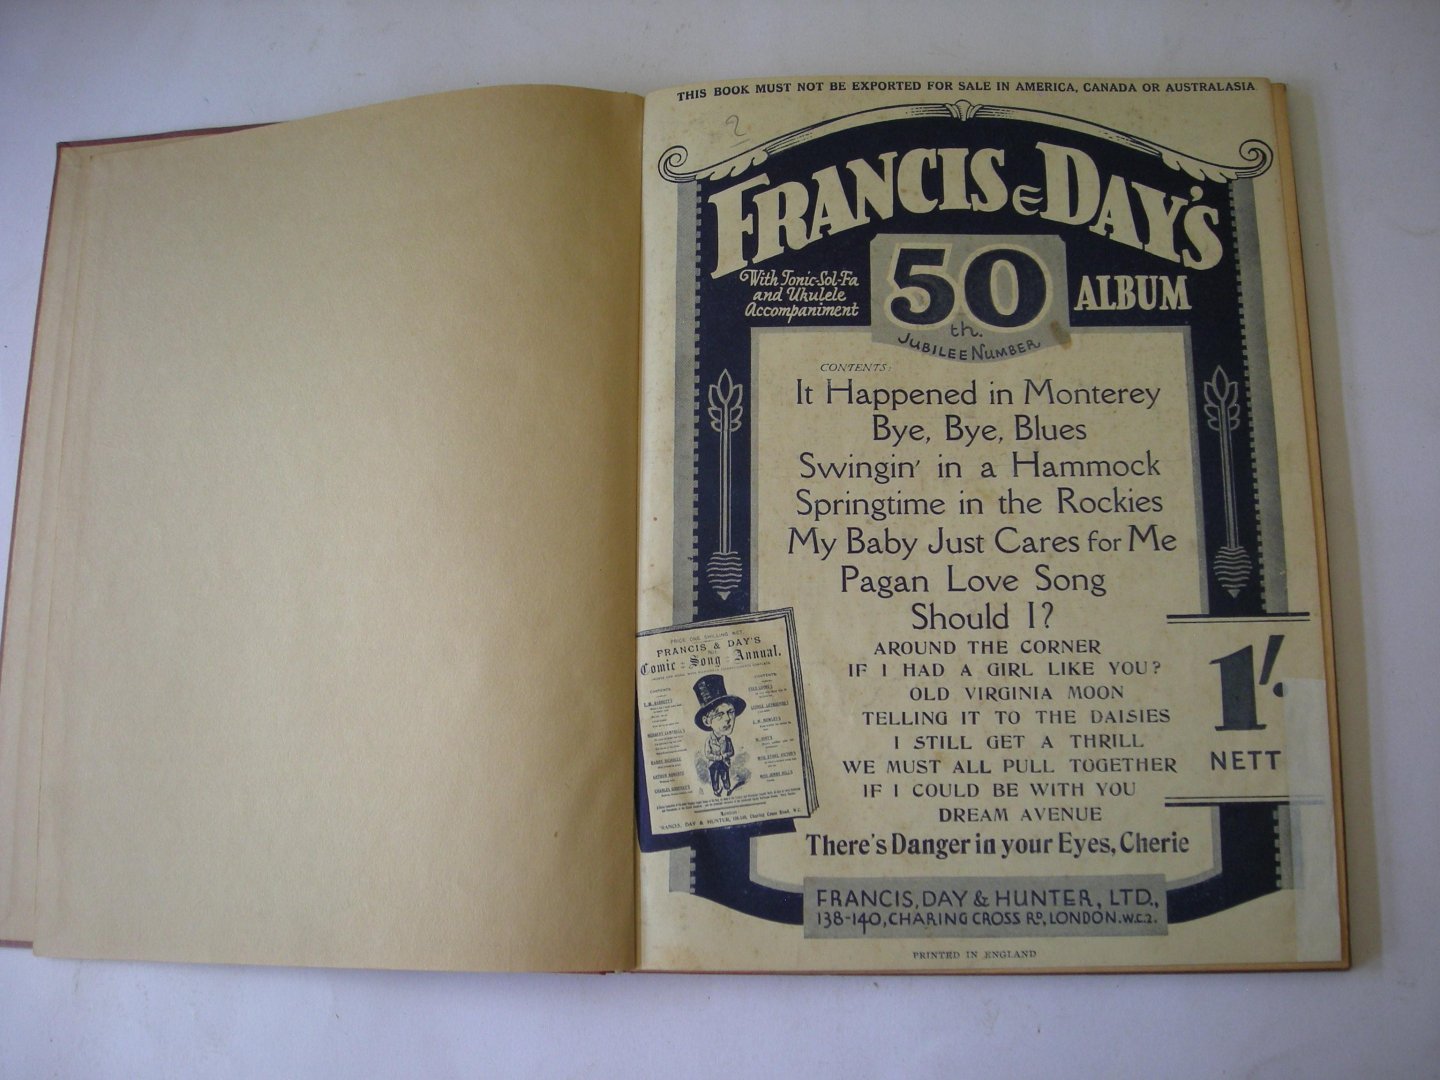 NN - Francis & Day's Annual,  with Tonic-Sol-Fa and Ukulele Accompaniments. It Happened in Monerey, Bye,Bye,Blues etc.